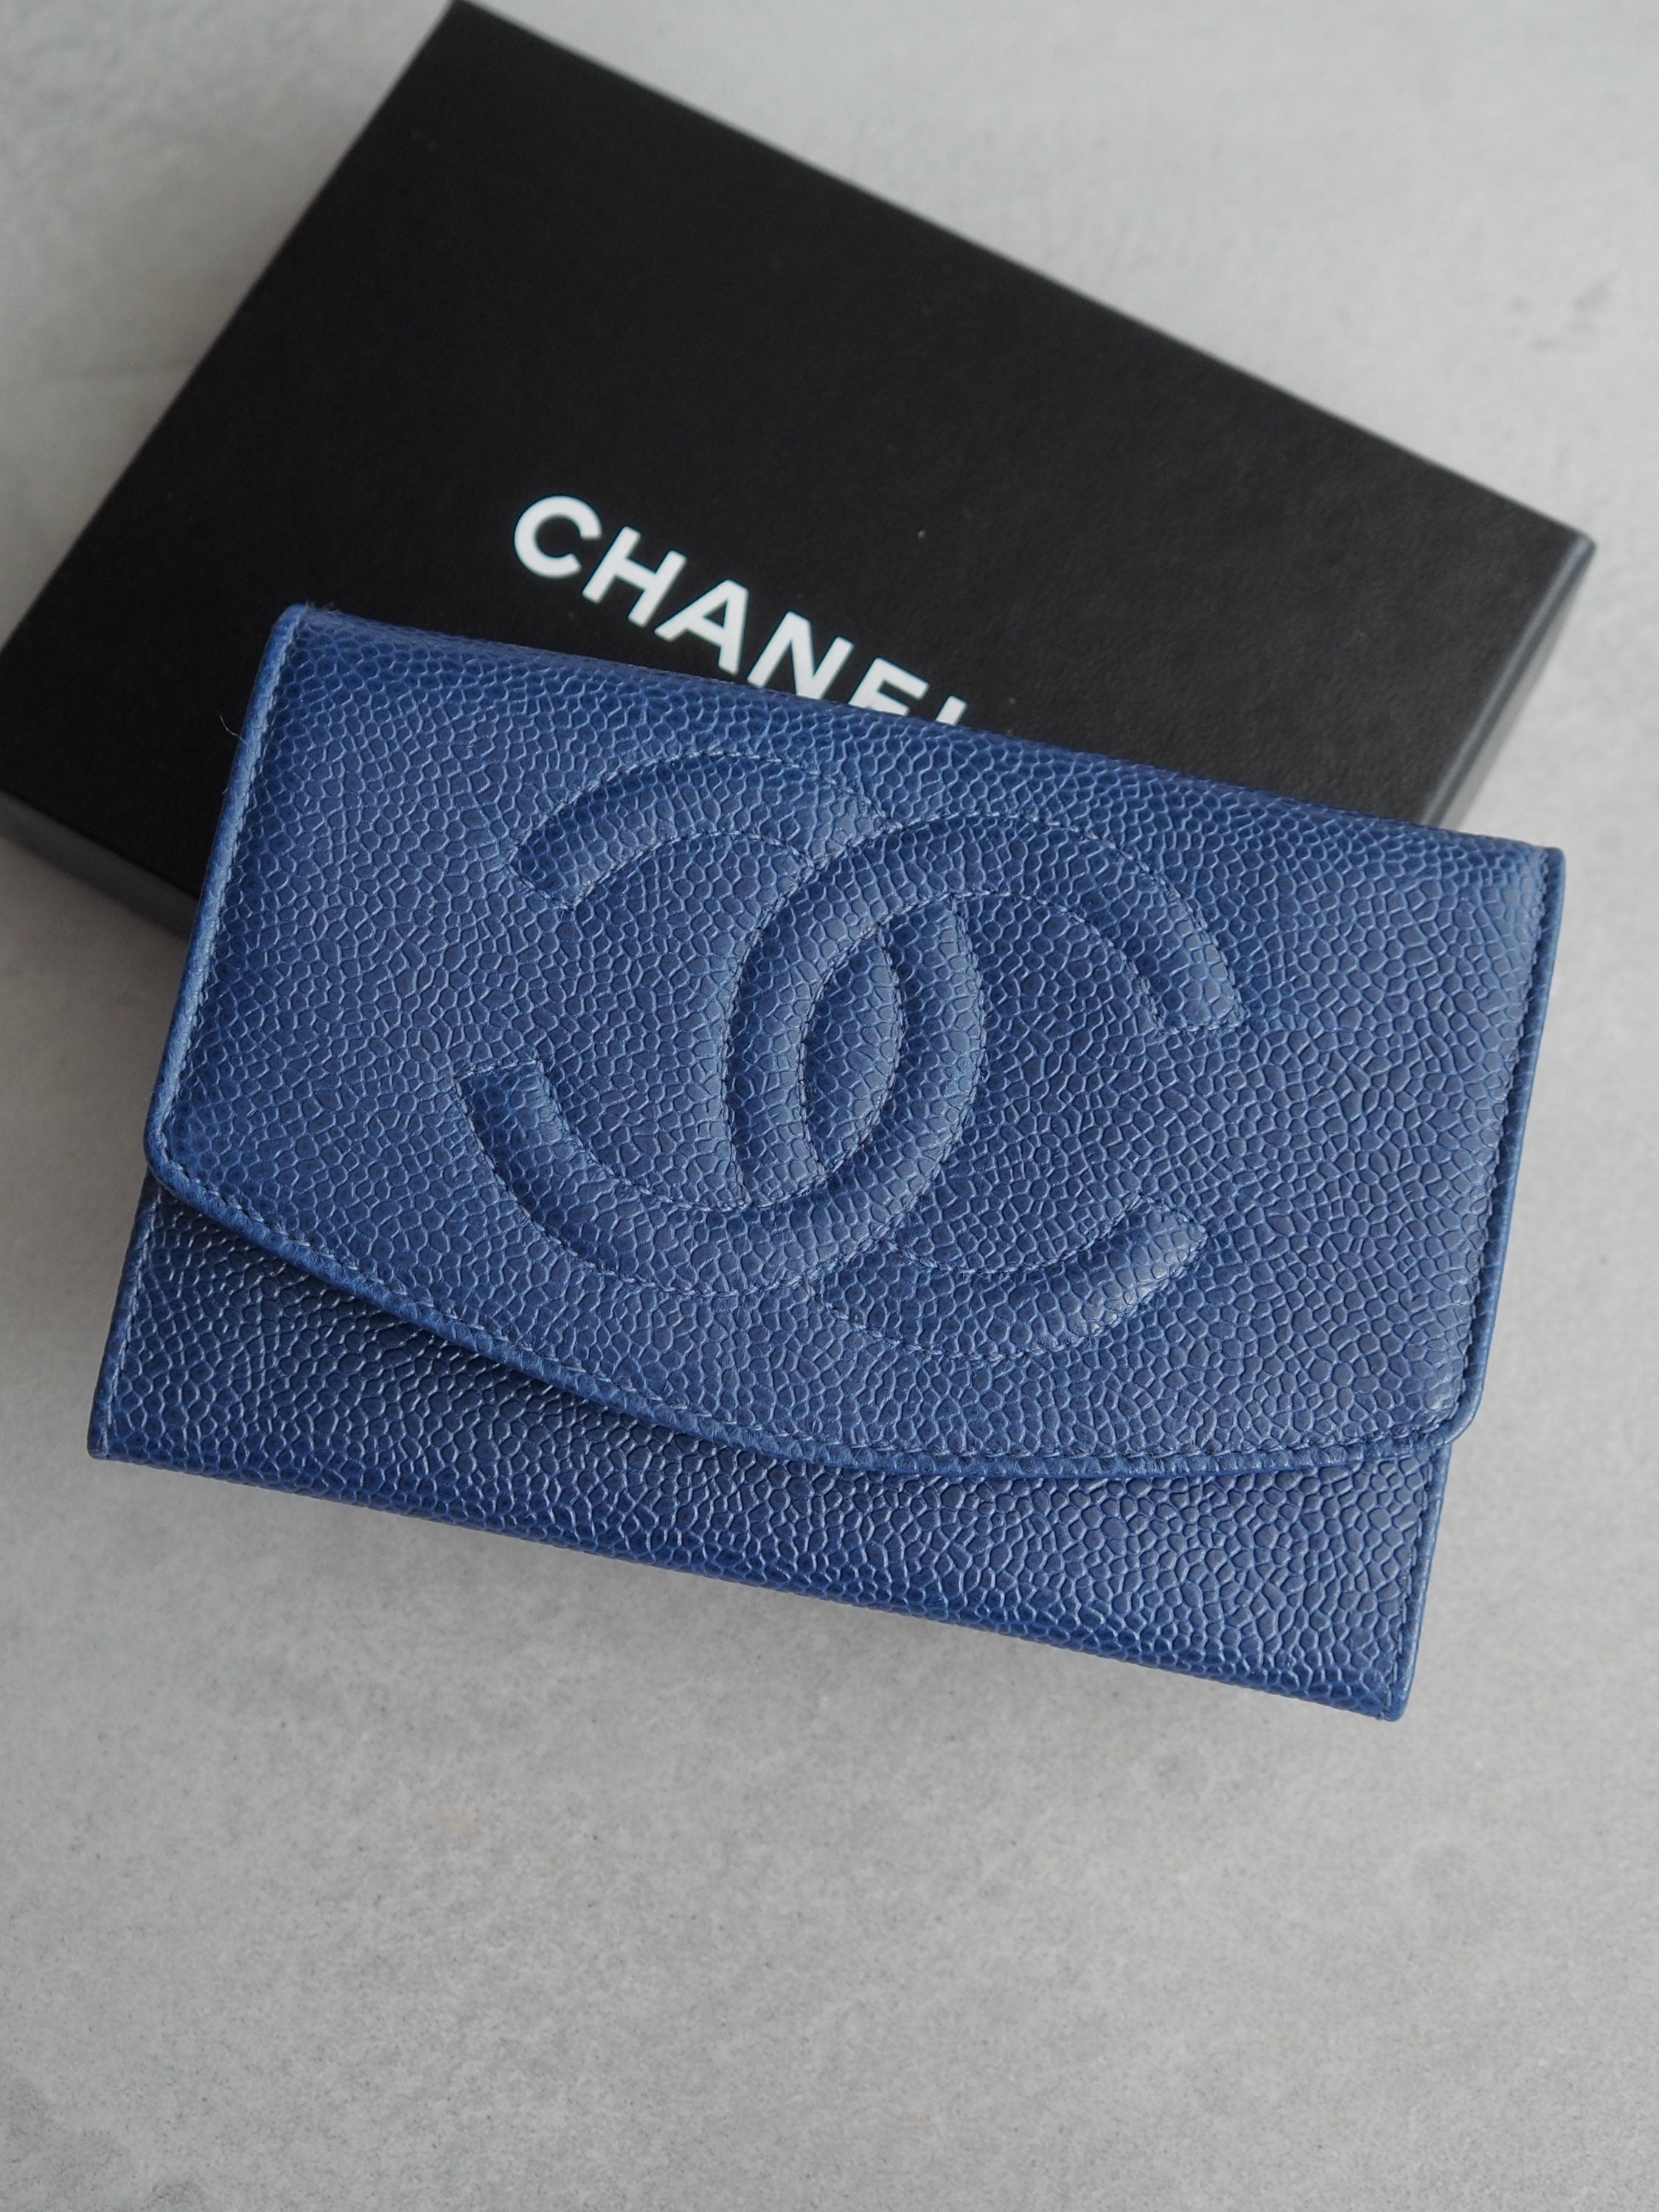 CHANEL COCO Wallet Purse Compact Caviar Skin Leather Blue Authentic Vintage Box